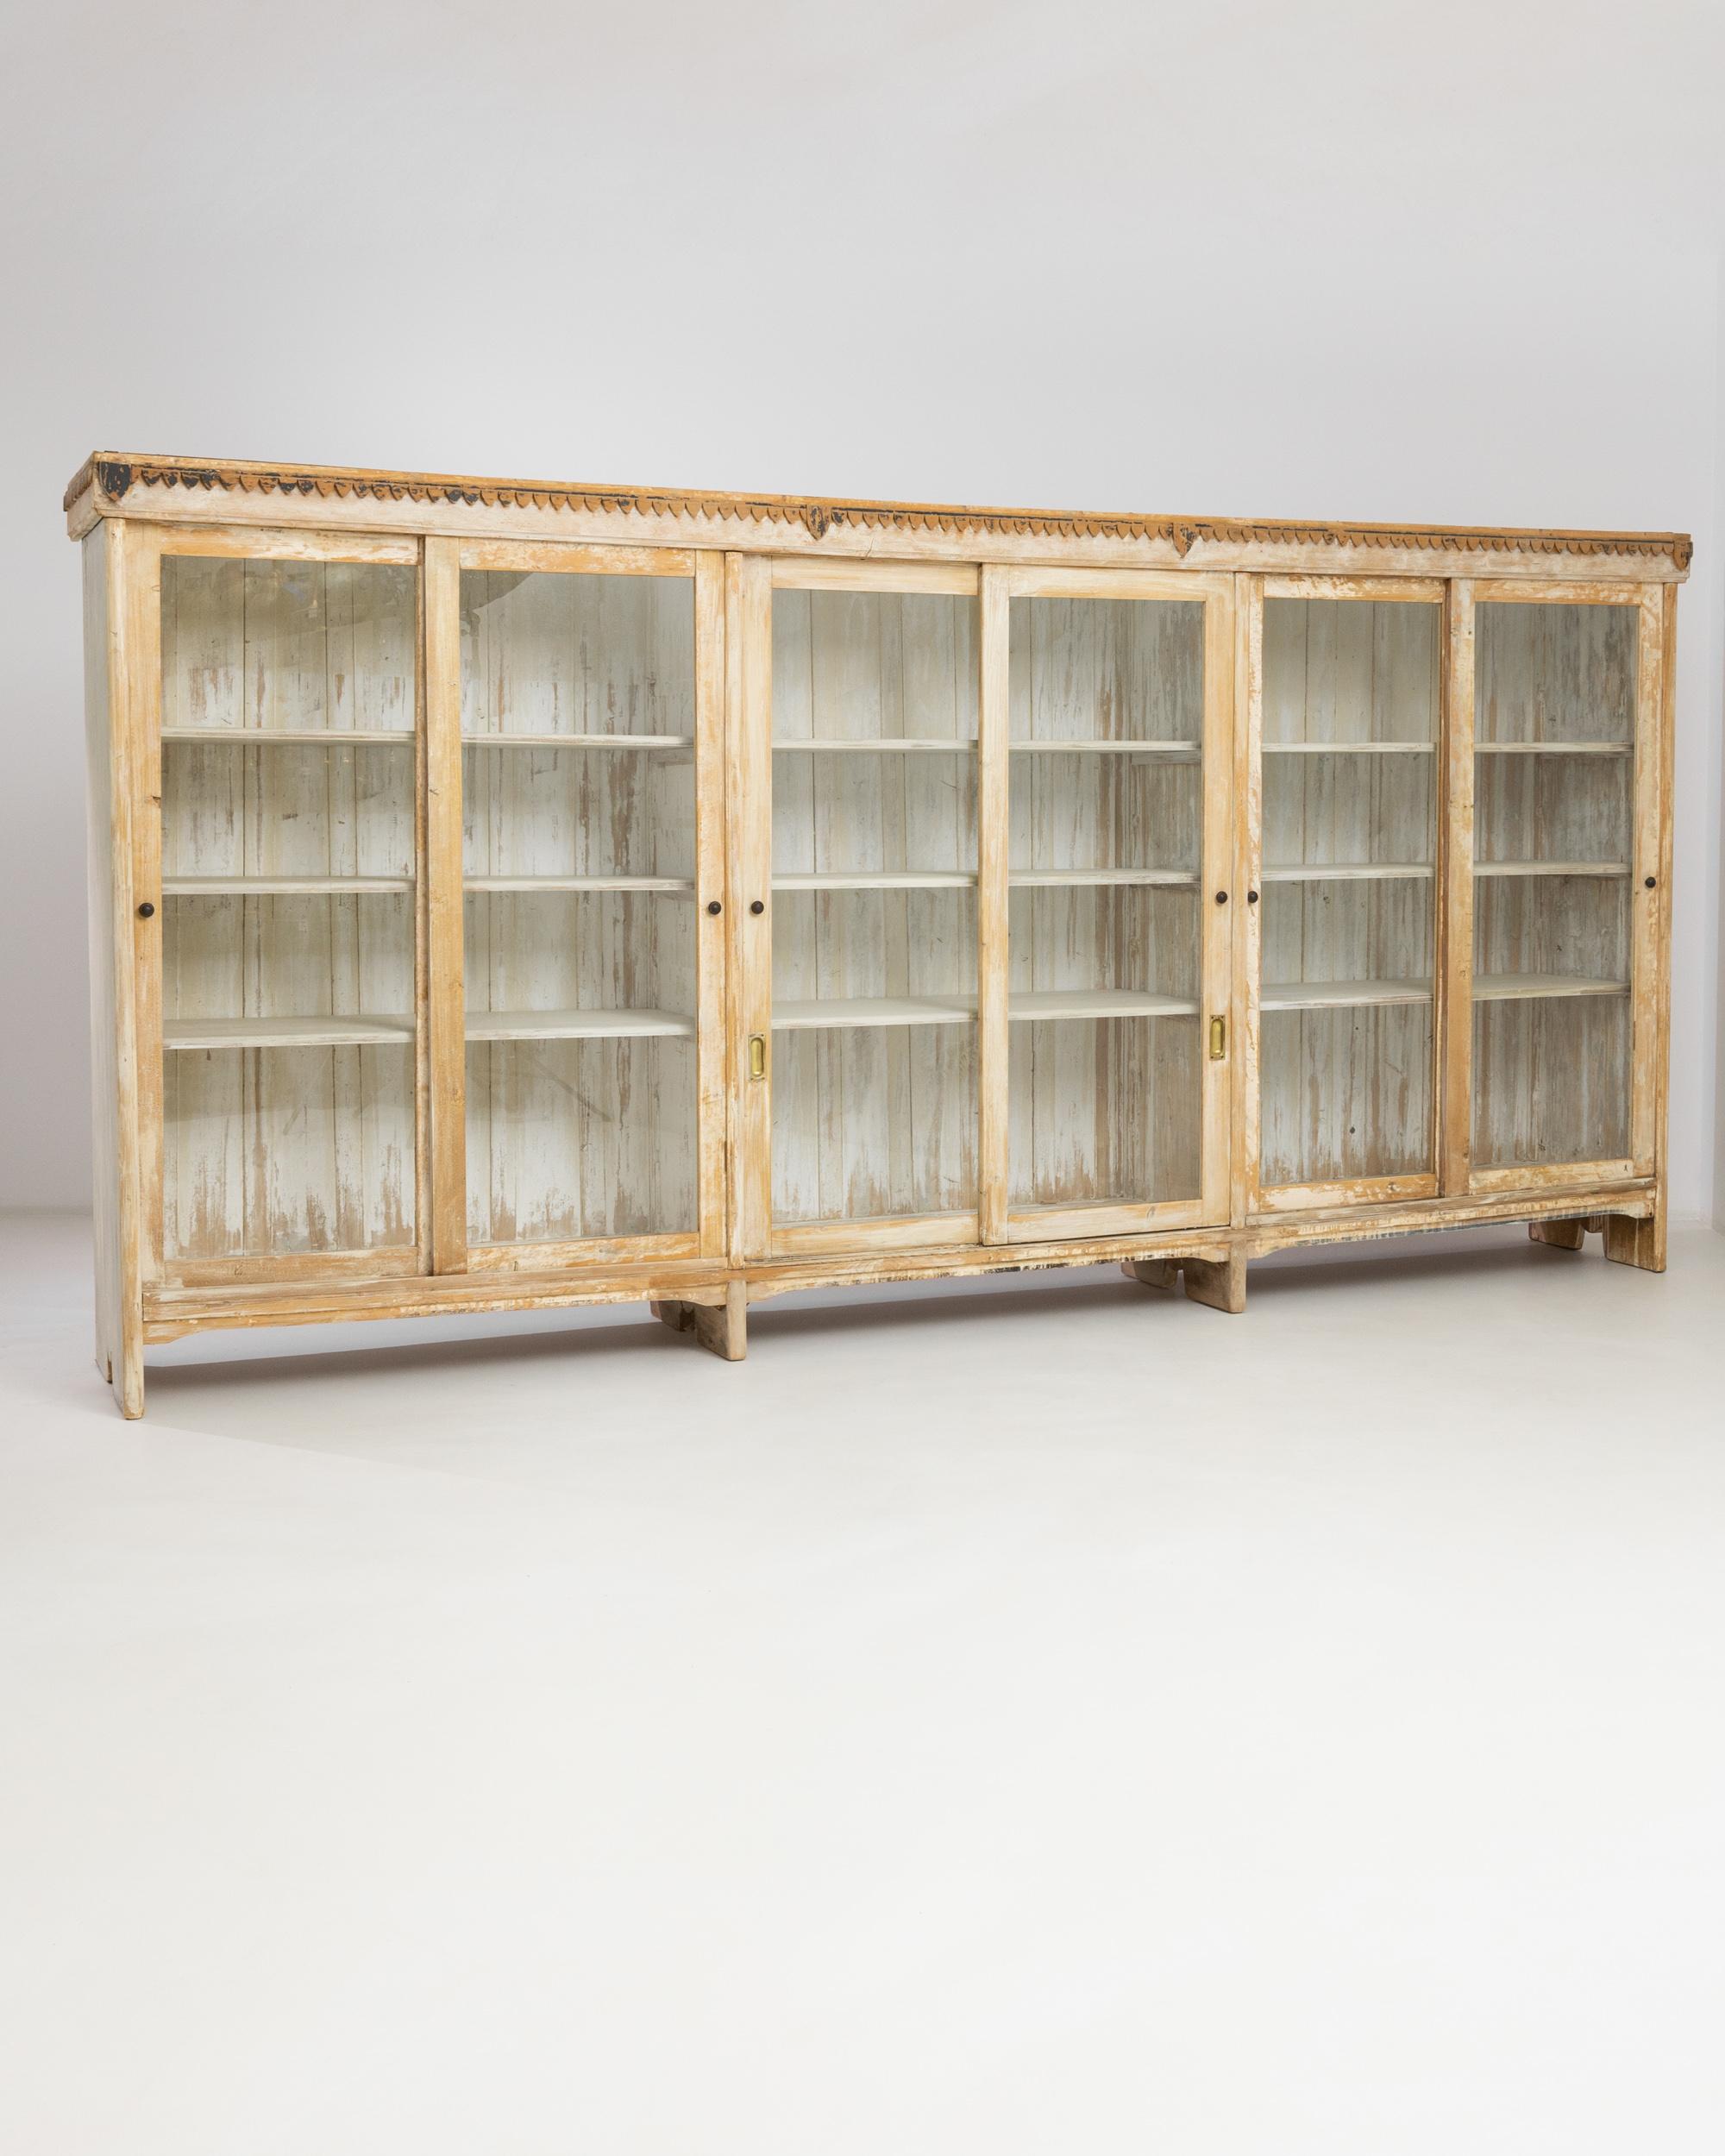 In a delightful nod to the past, this 1910s Central European White Patinated Wooden Vitrine unfolds its story across three distinct sections. Each of these segments reveals a pair of sliding glass doors, elegantly framing the treasures within. With